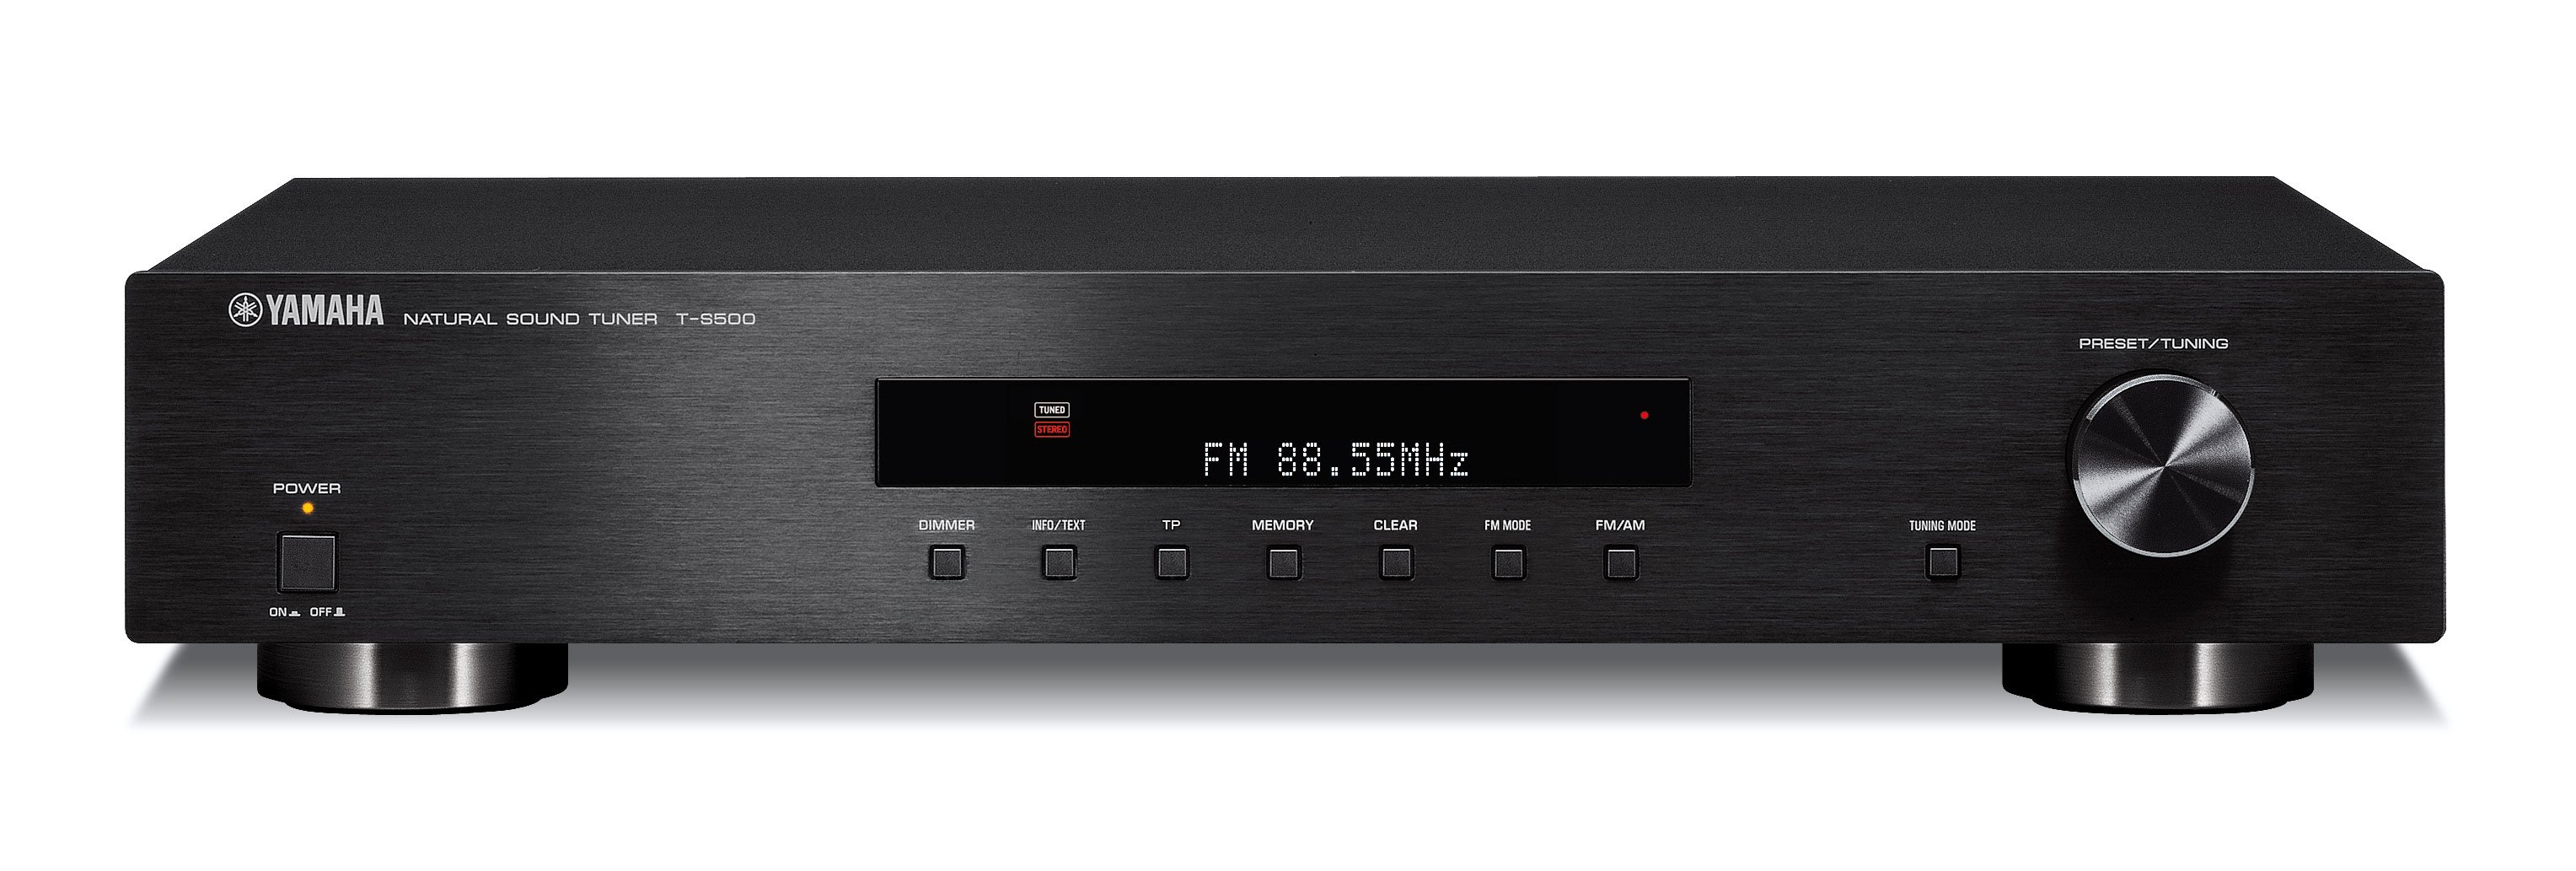 T-S500 - Overview - HiFi Components - Audio & Visual - Products 